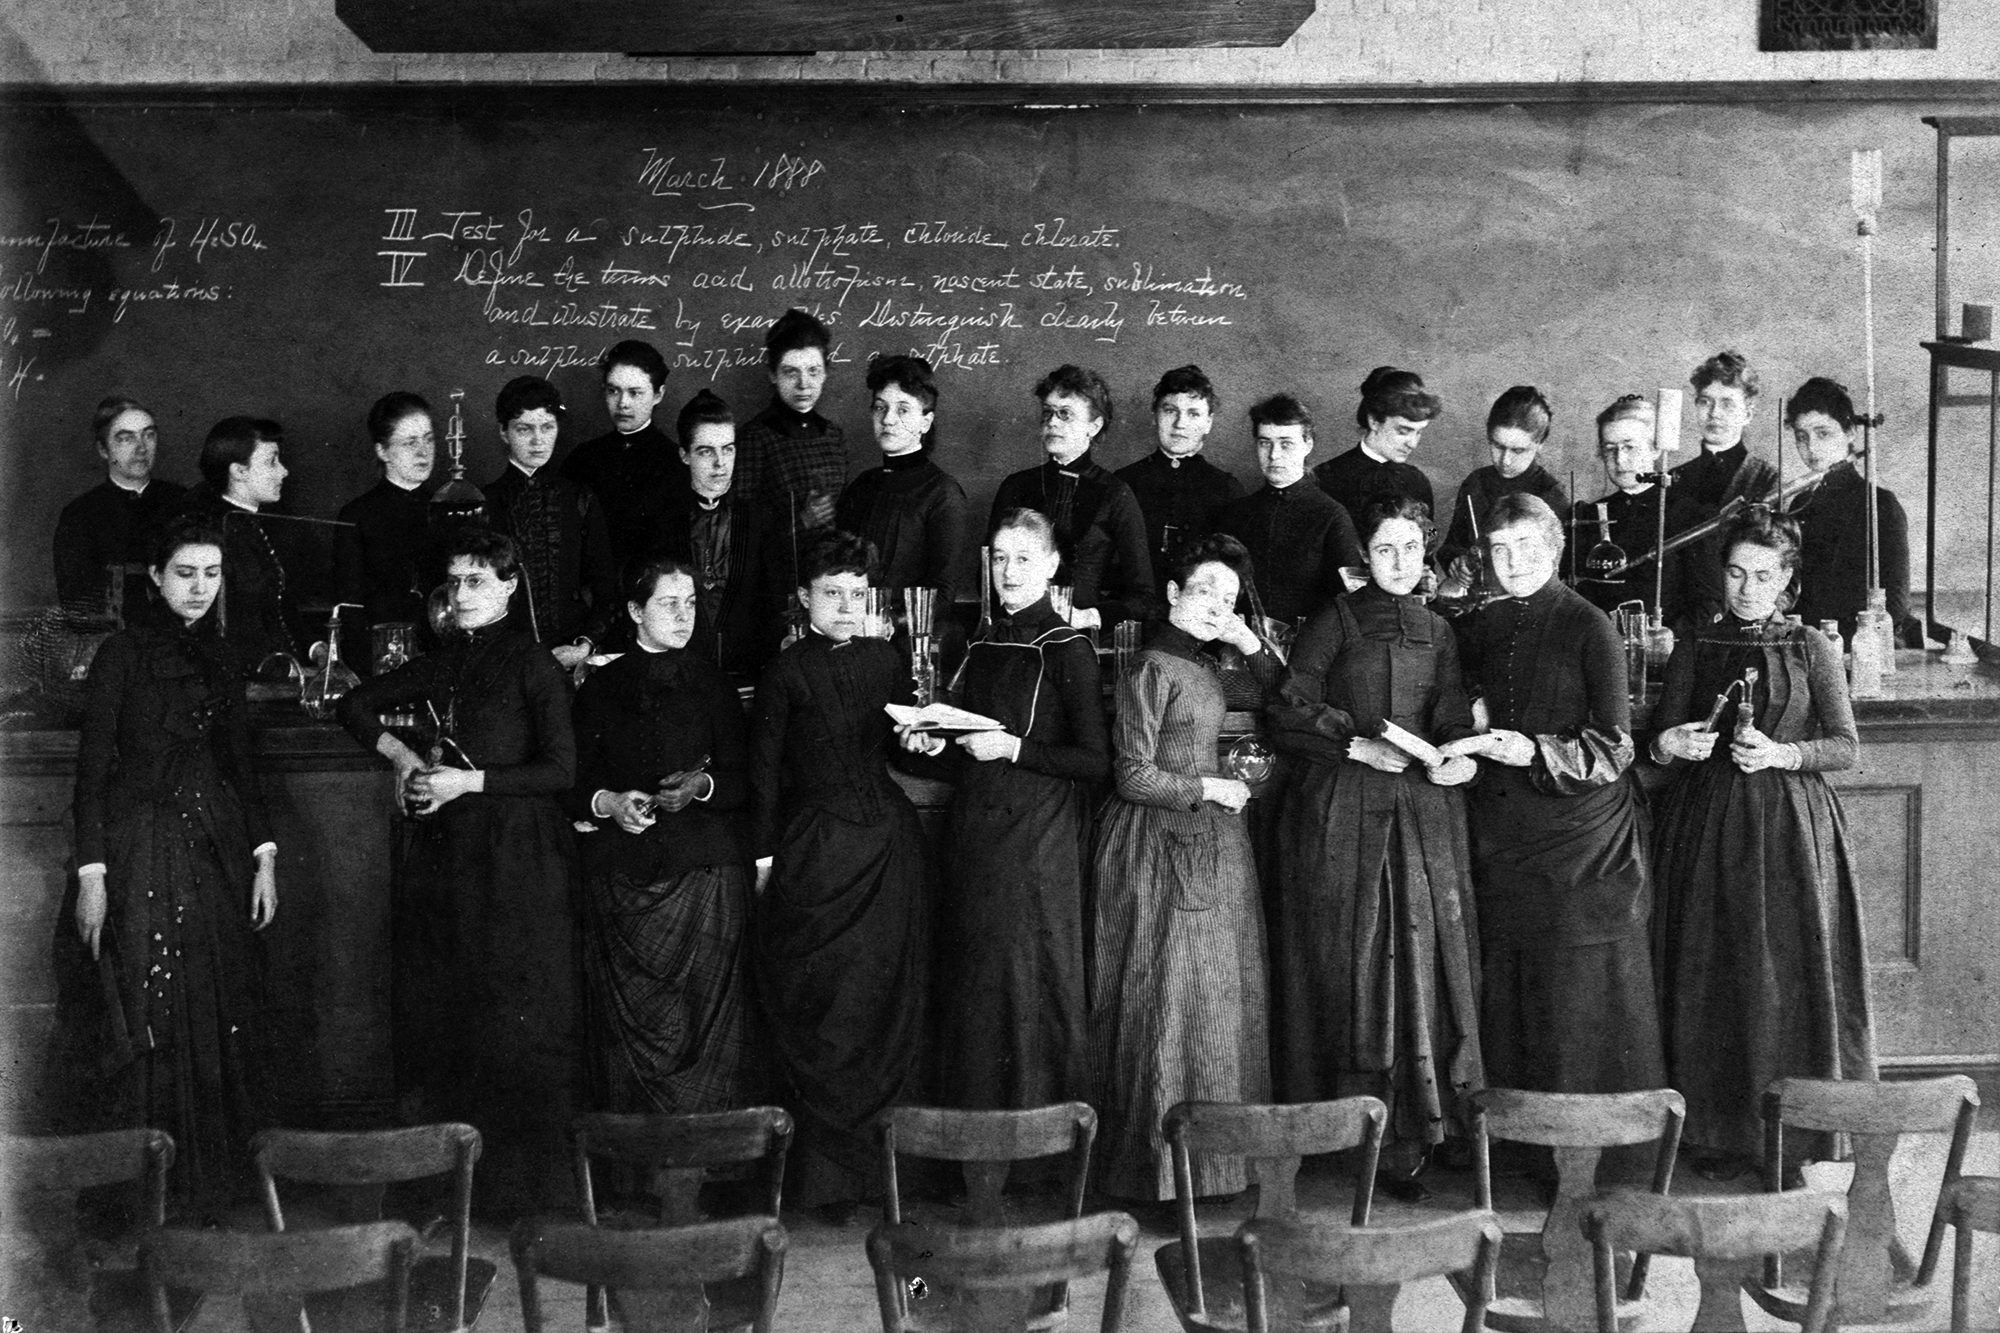 Ellen Swallow Richards in 1888 with students from the MIT Women’s Laboratory